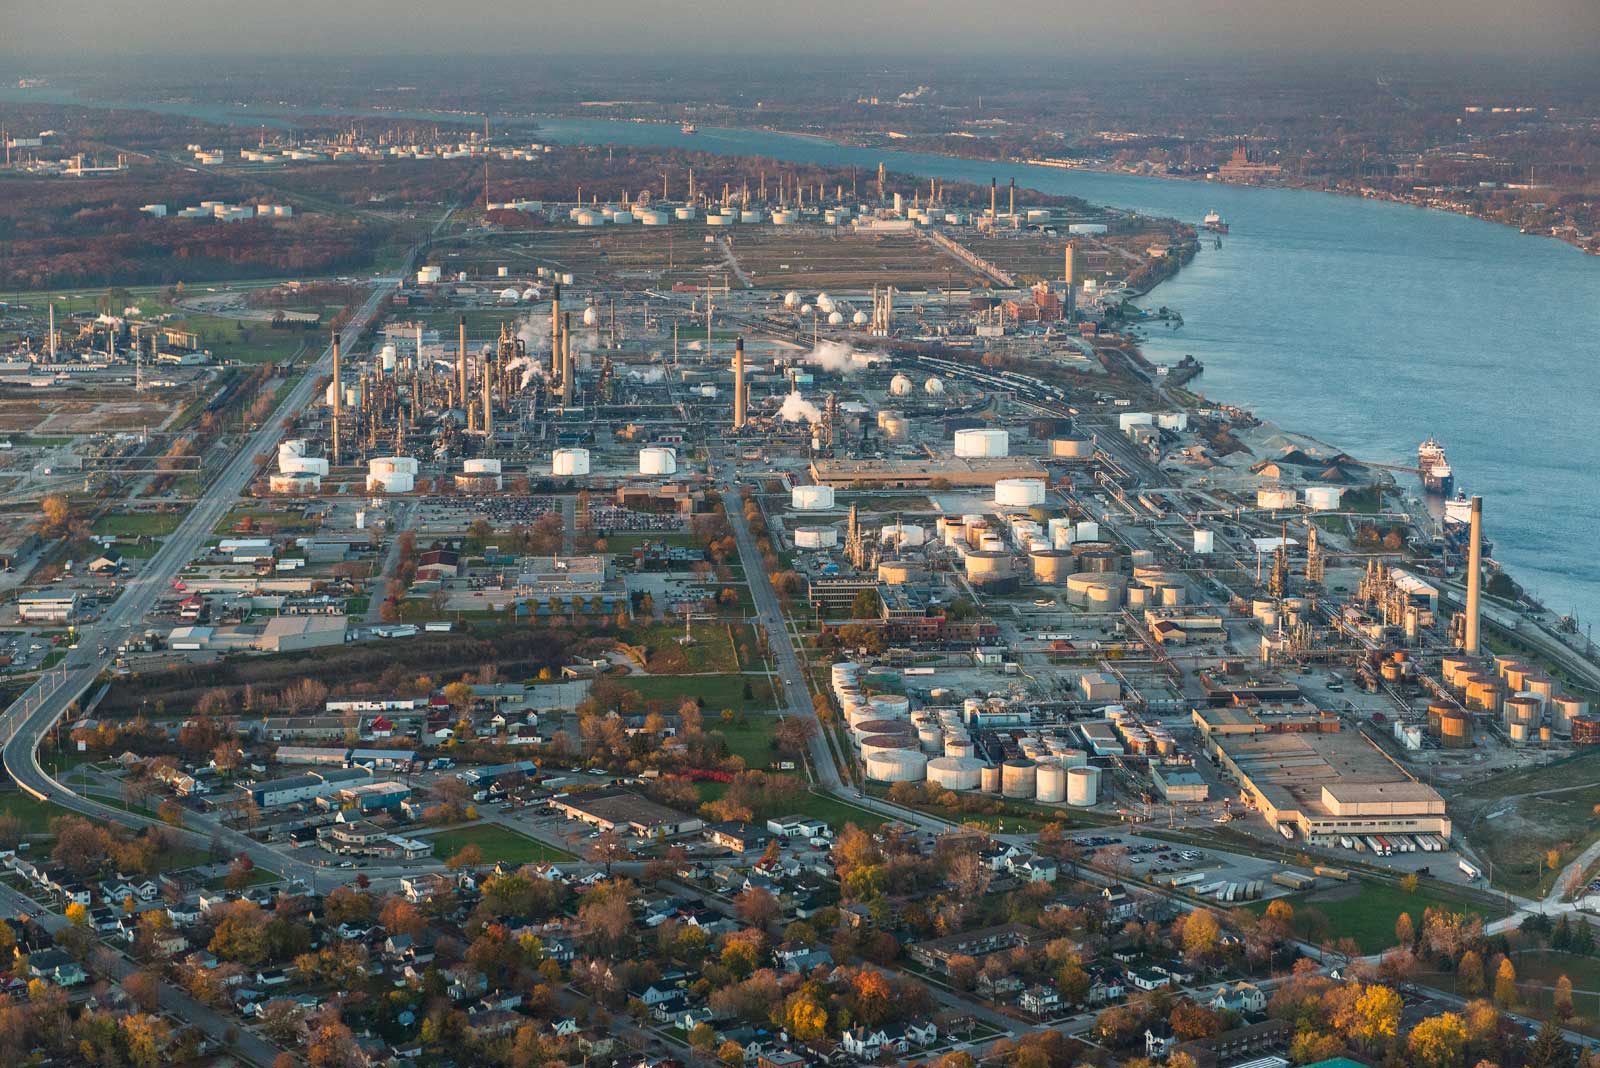 Aerial view of a town and large industrial complexes close to the water.